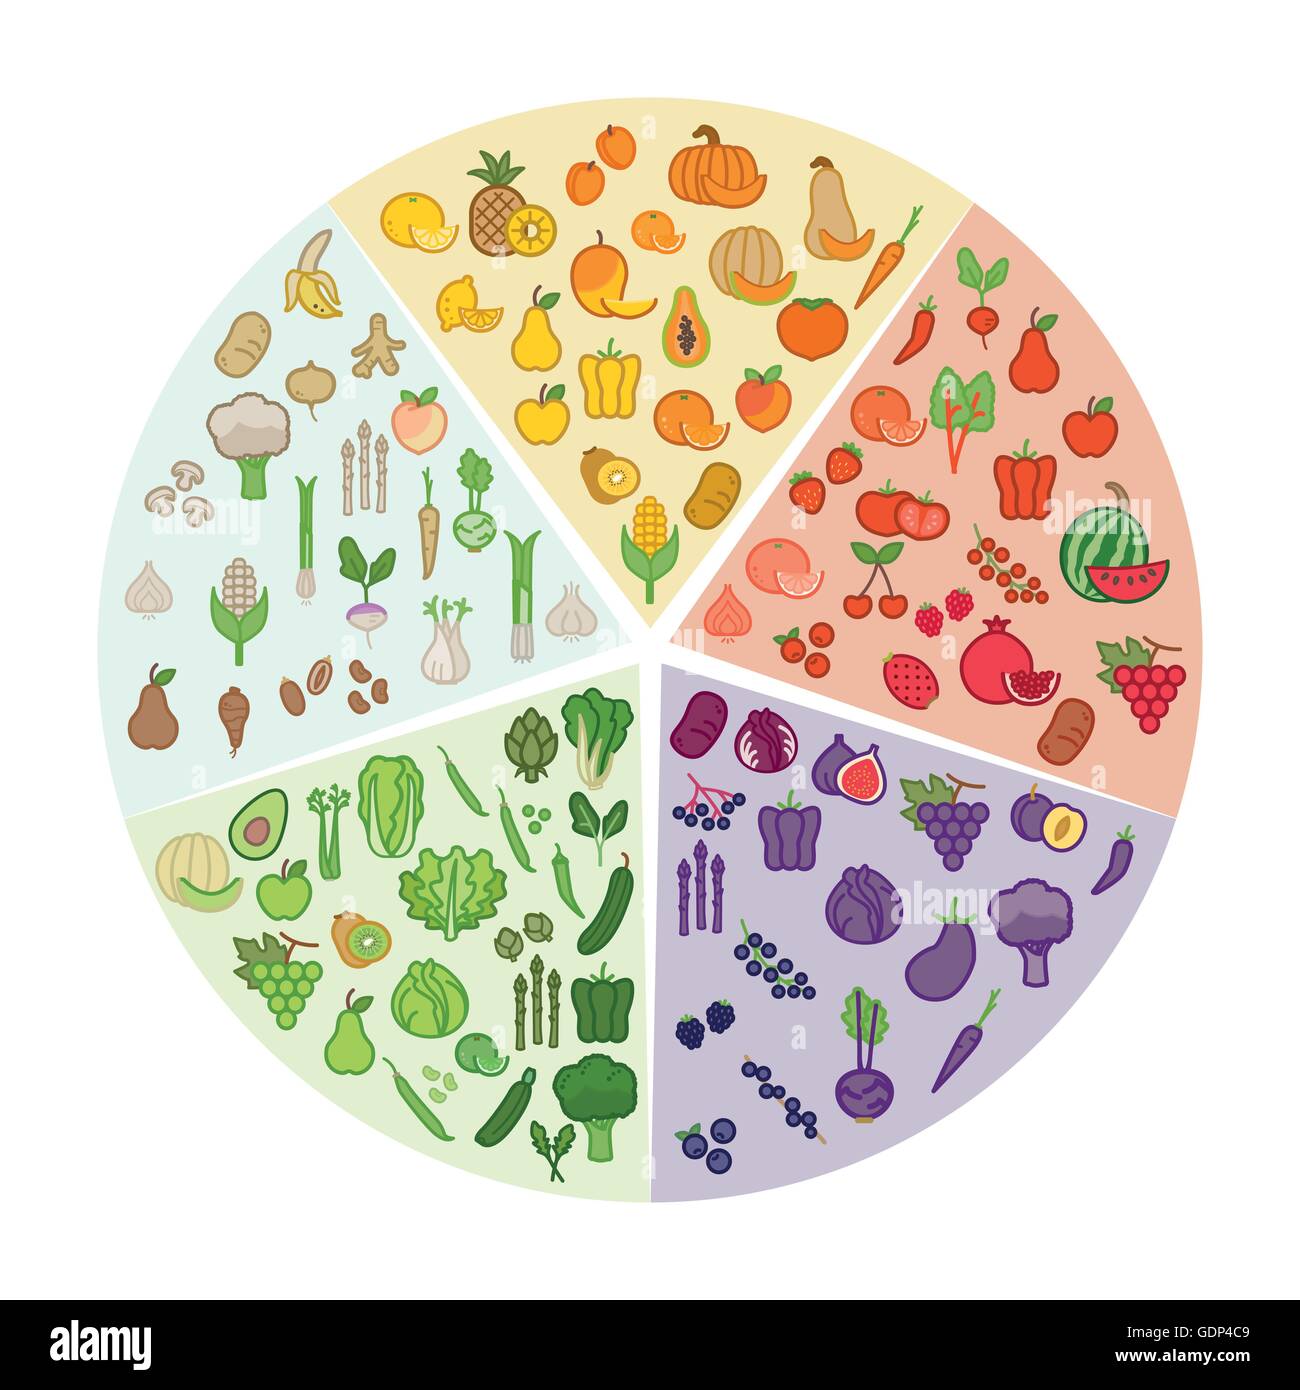 The food color wheel chart stock vector. Illustration of salad - 62166034